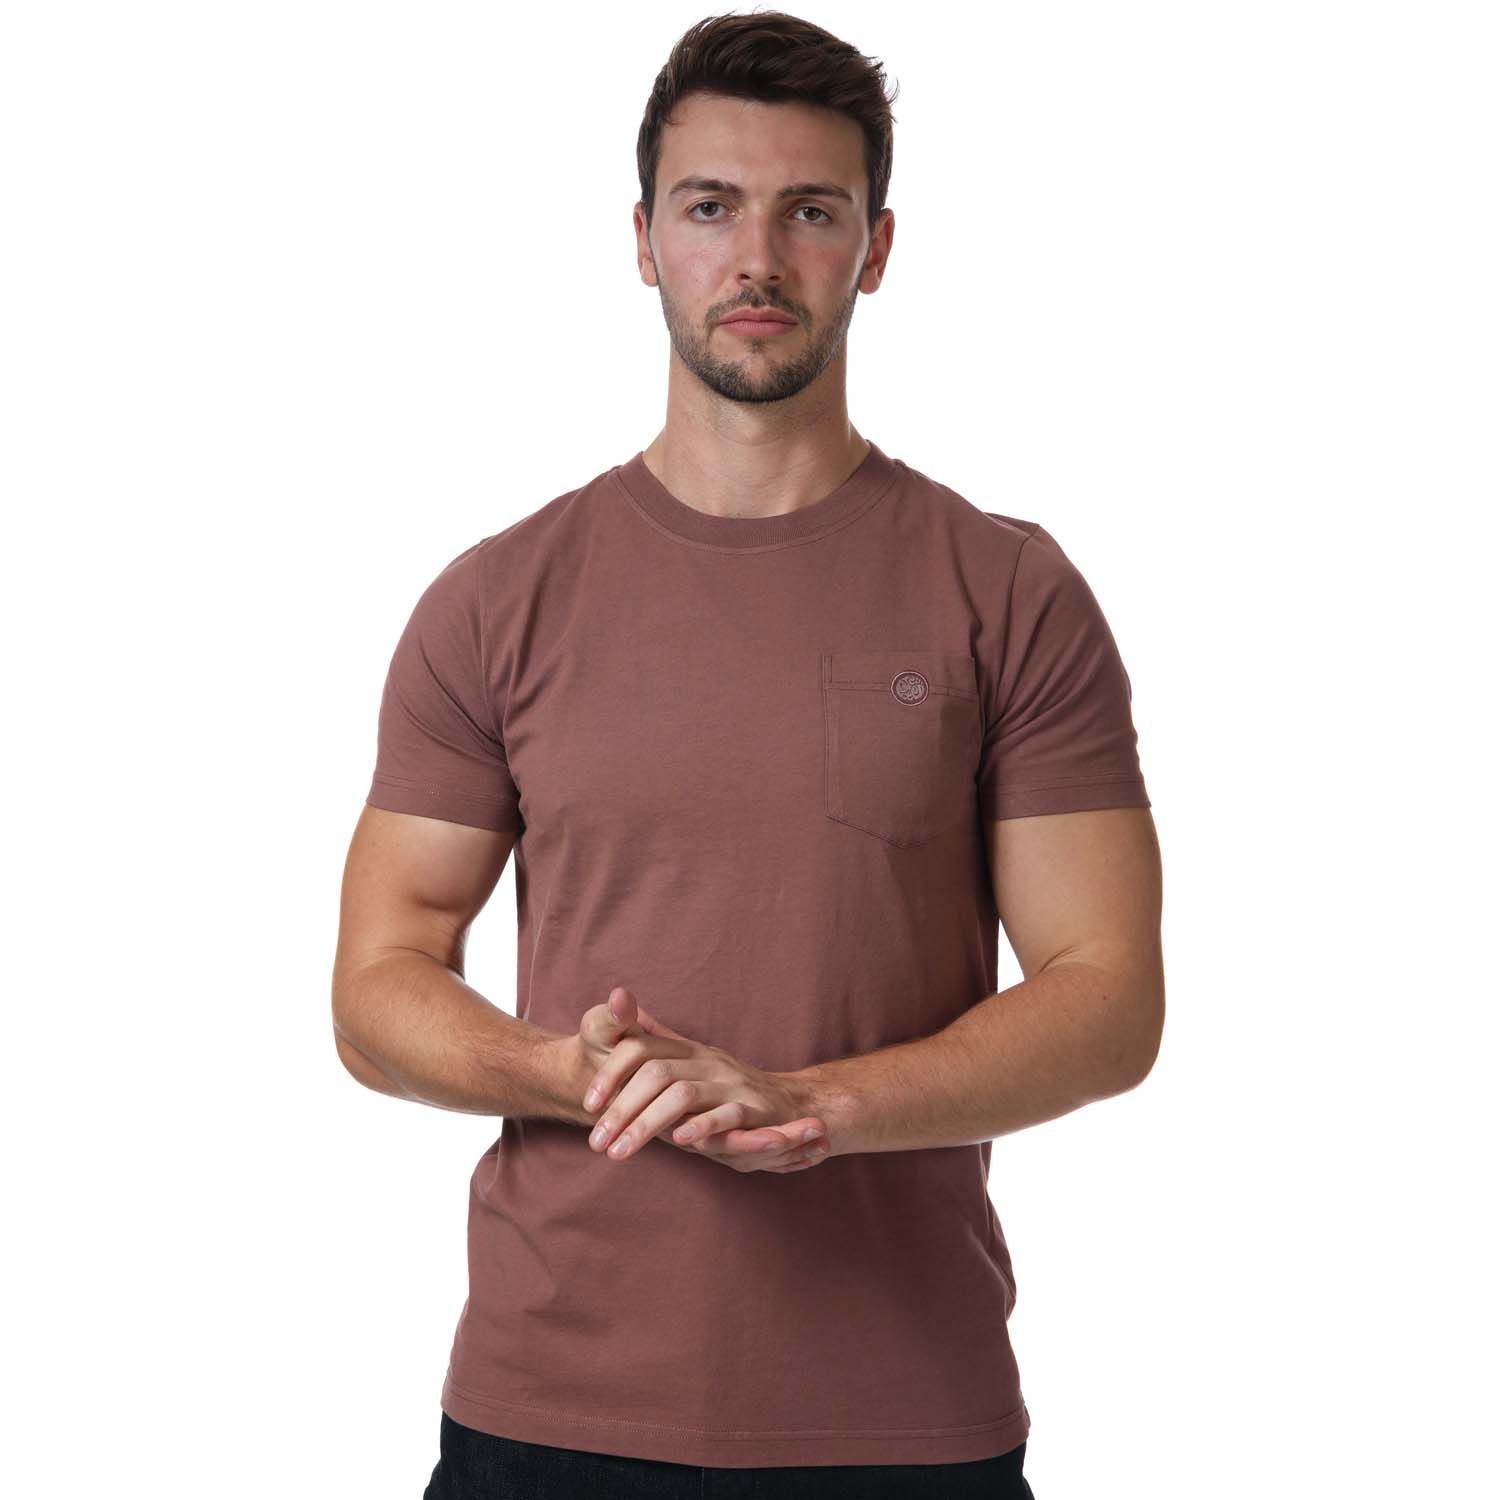 Pretty Green Vega Pocket T- Shirt in burgundy.- Ribbed crew neckline.- Short sleeves.- Pouch pocket is situated on the left of the chest.- Signature Pretty Green logo badge embroidered on top of the pocket.- Regular fit.- 100% Organic Cotton.- Ref:G21Q3MUJER902B